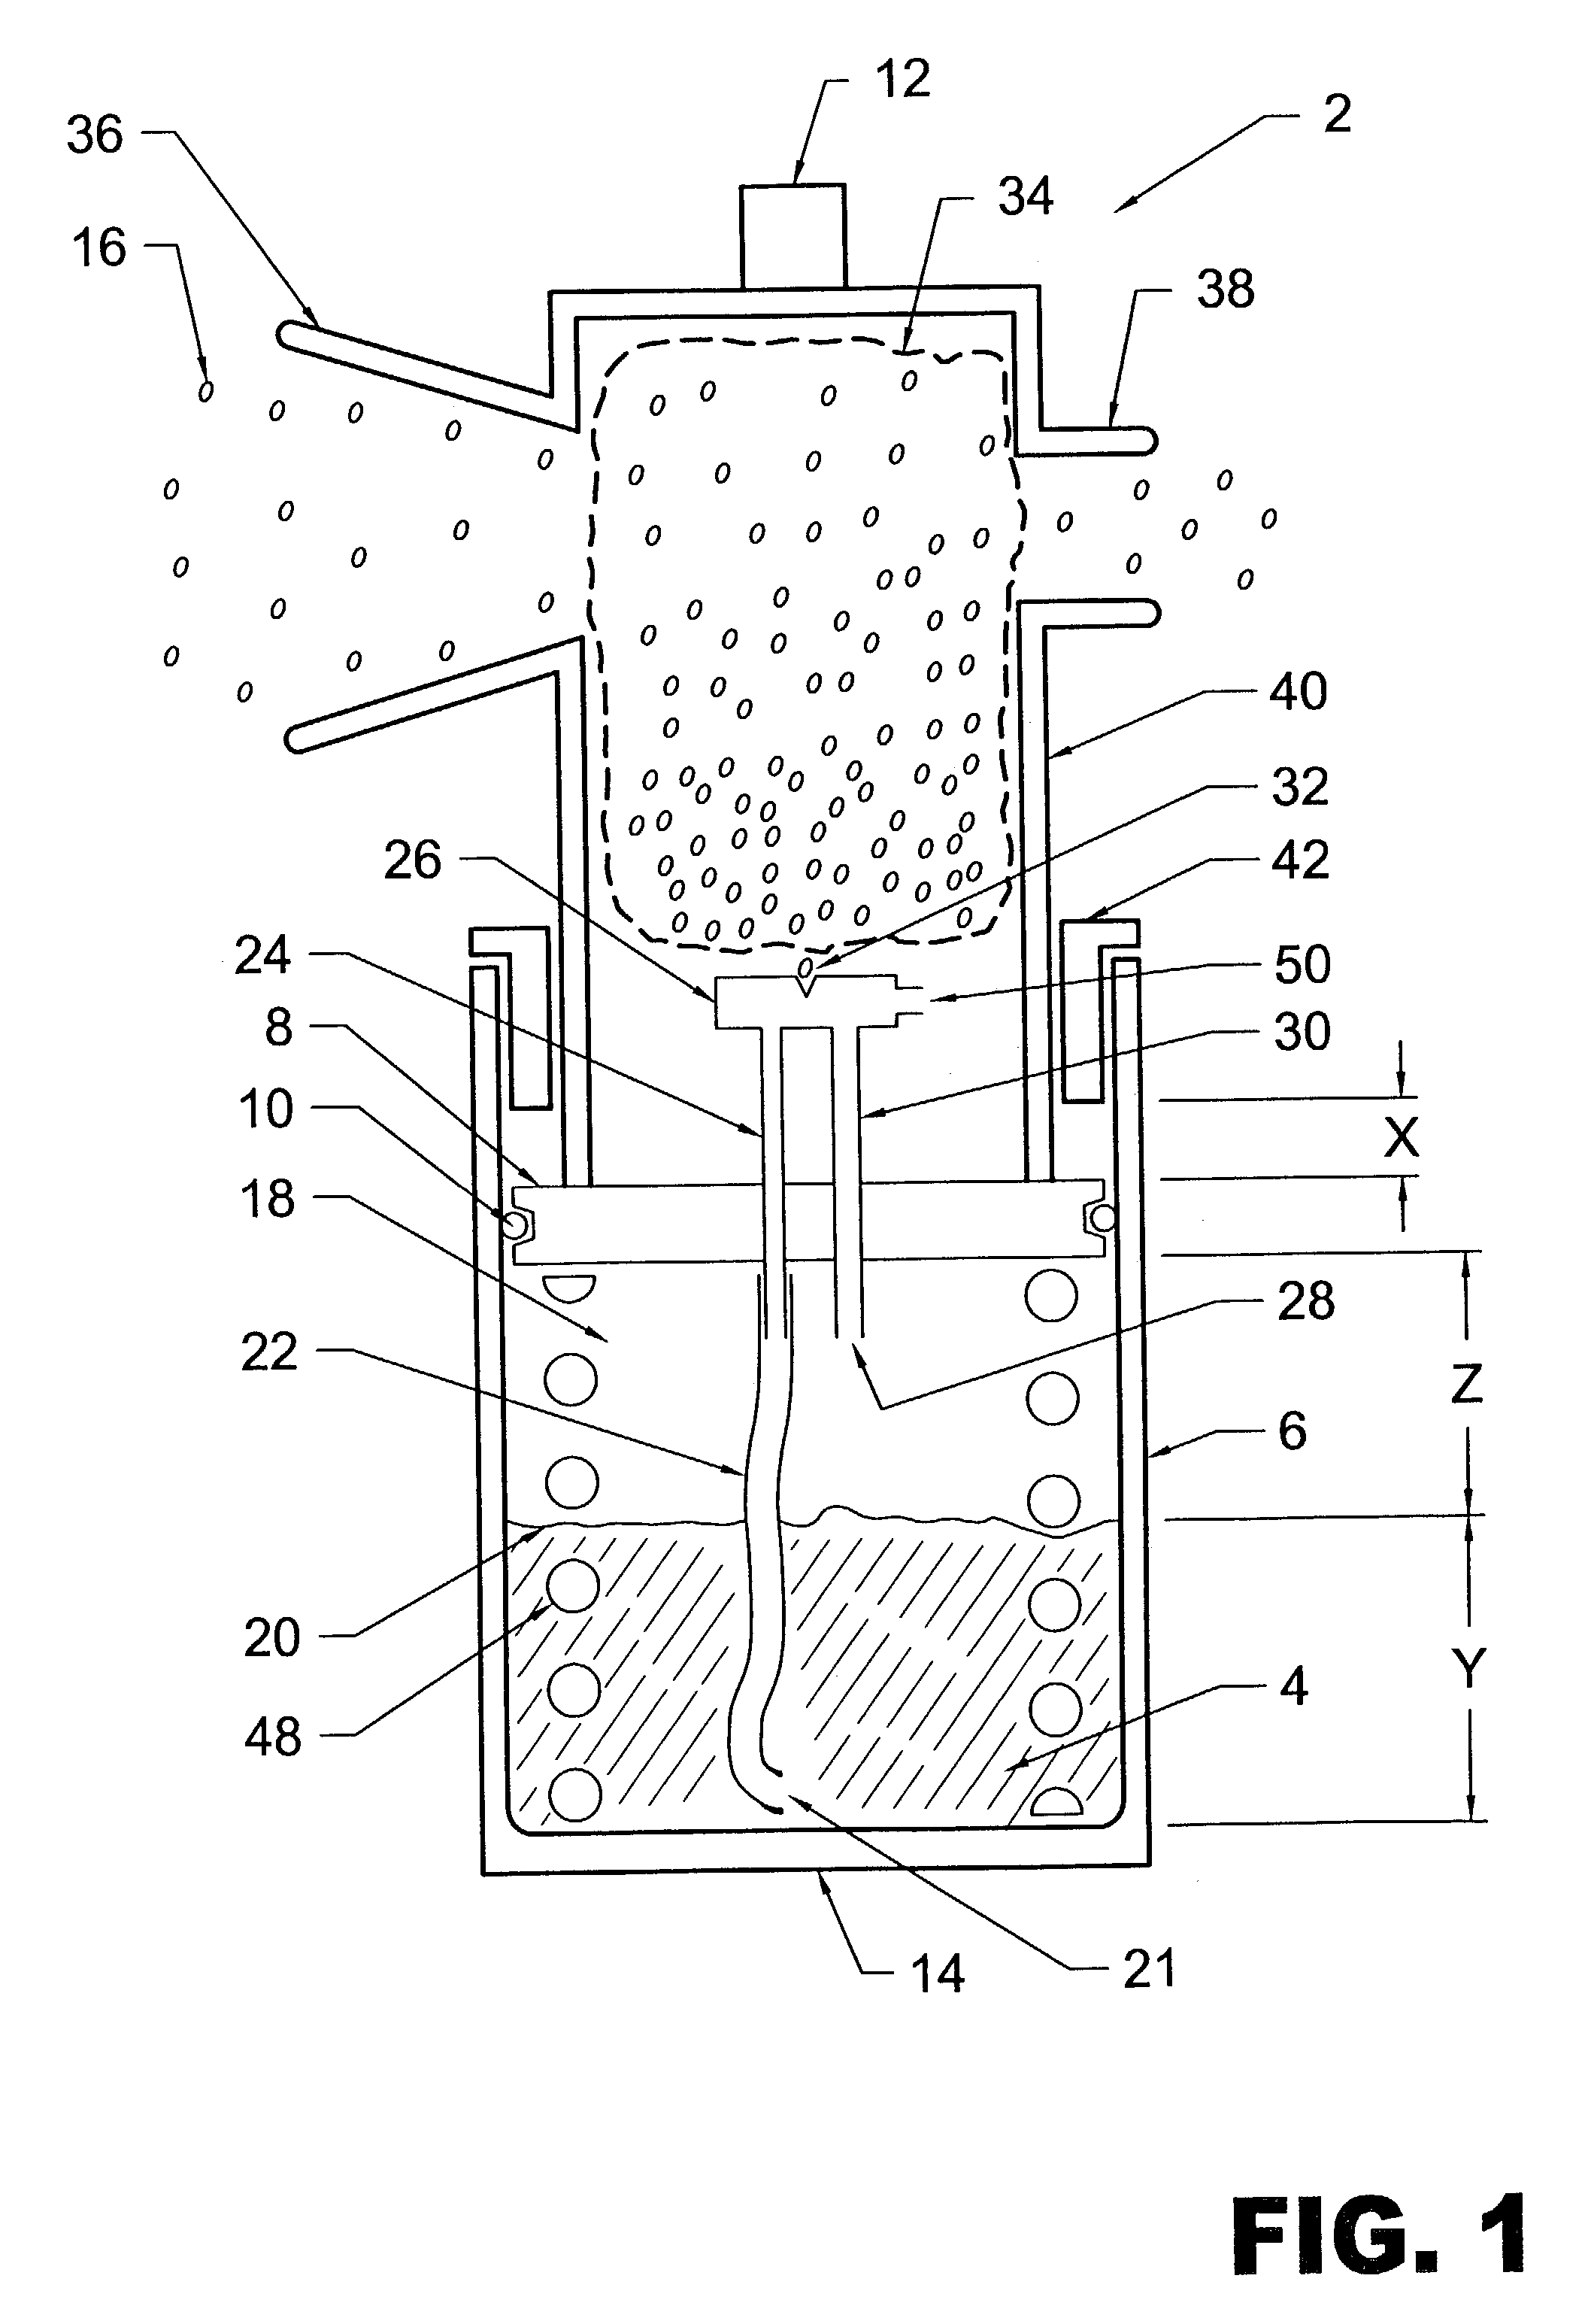 Methods and apparatus to prevent, treat and cure infections of the human respiratory system by pathogens causing severe acute respiratory syndrome (SARS)